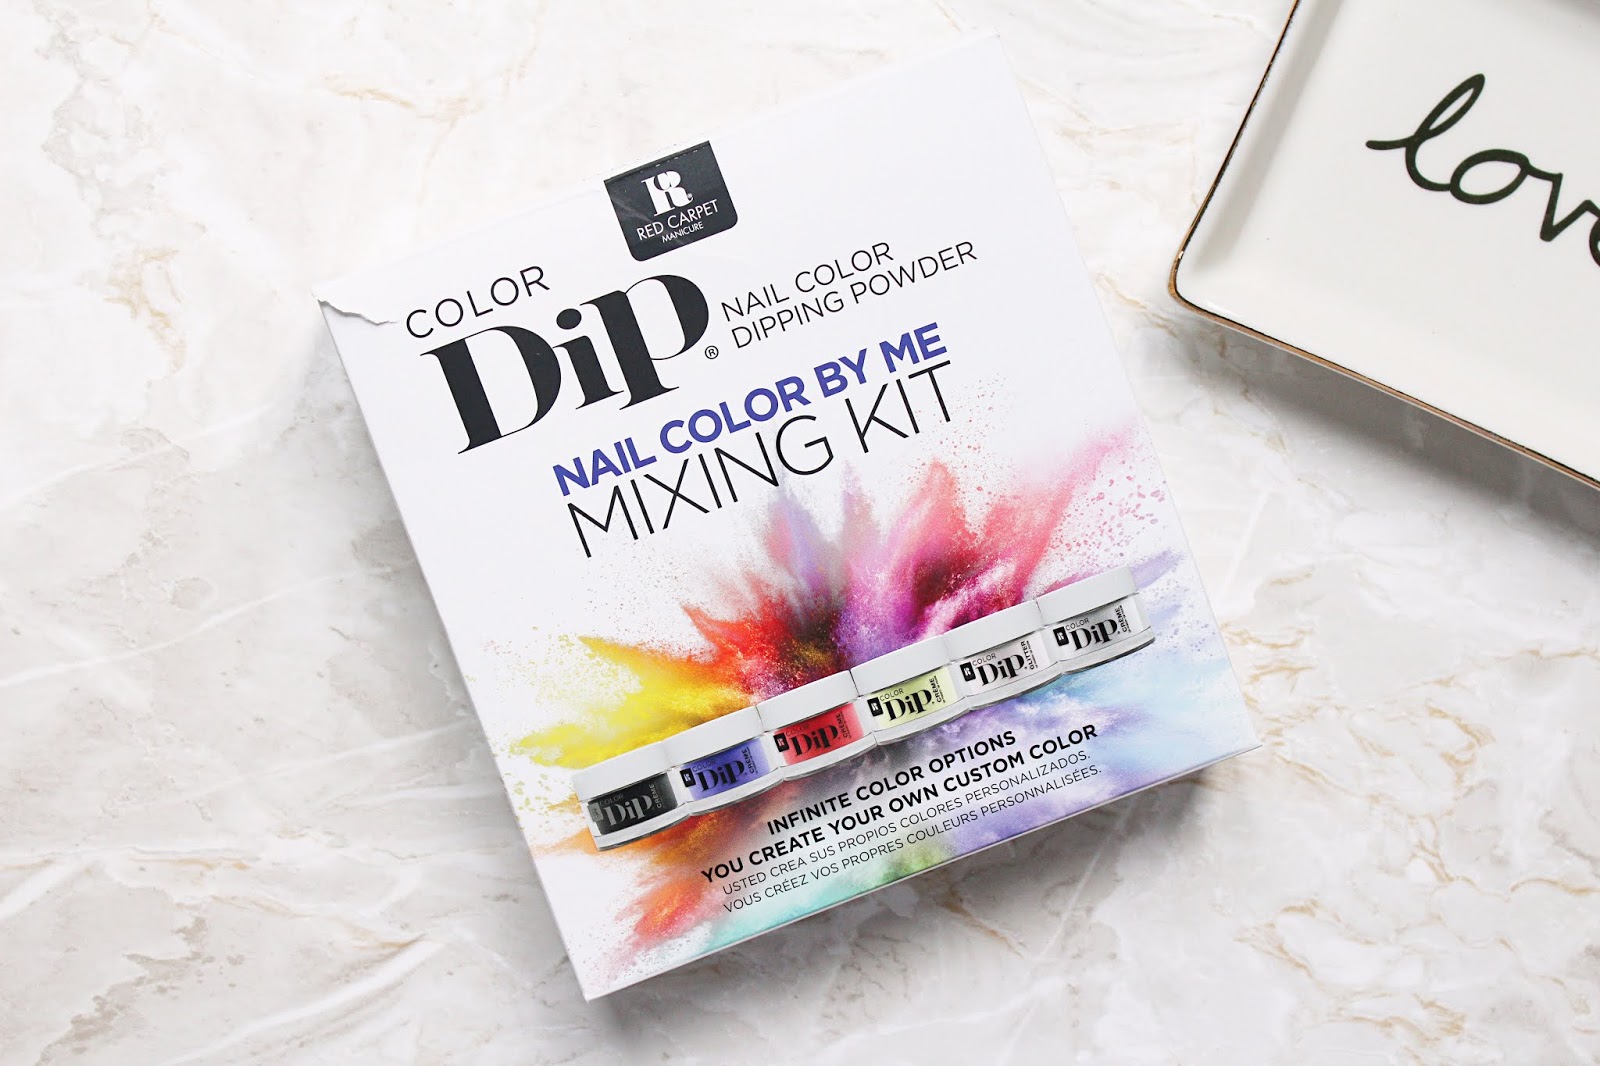 Red Carpet Manicure Colour Dip Mixing Kit Review